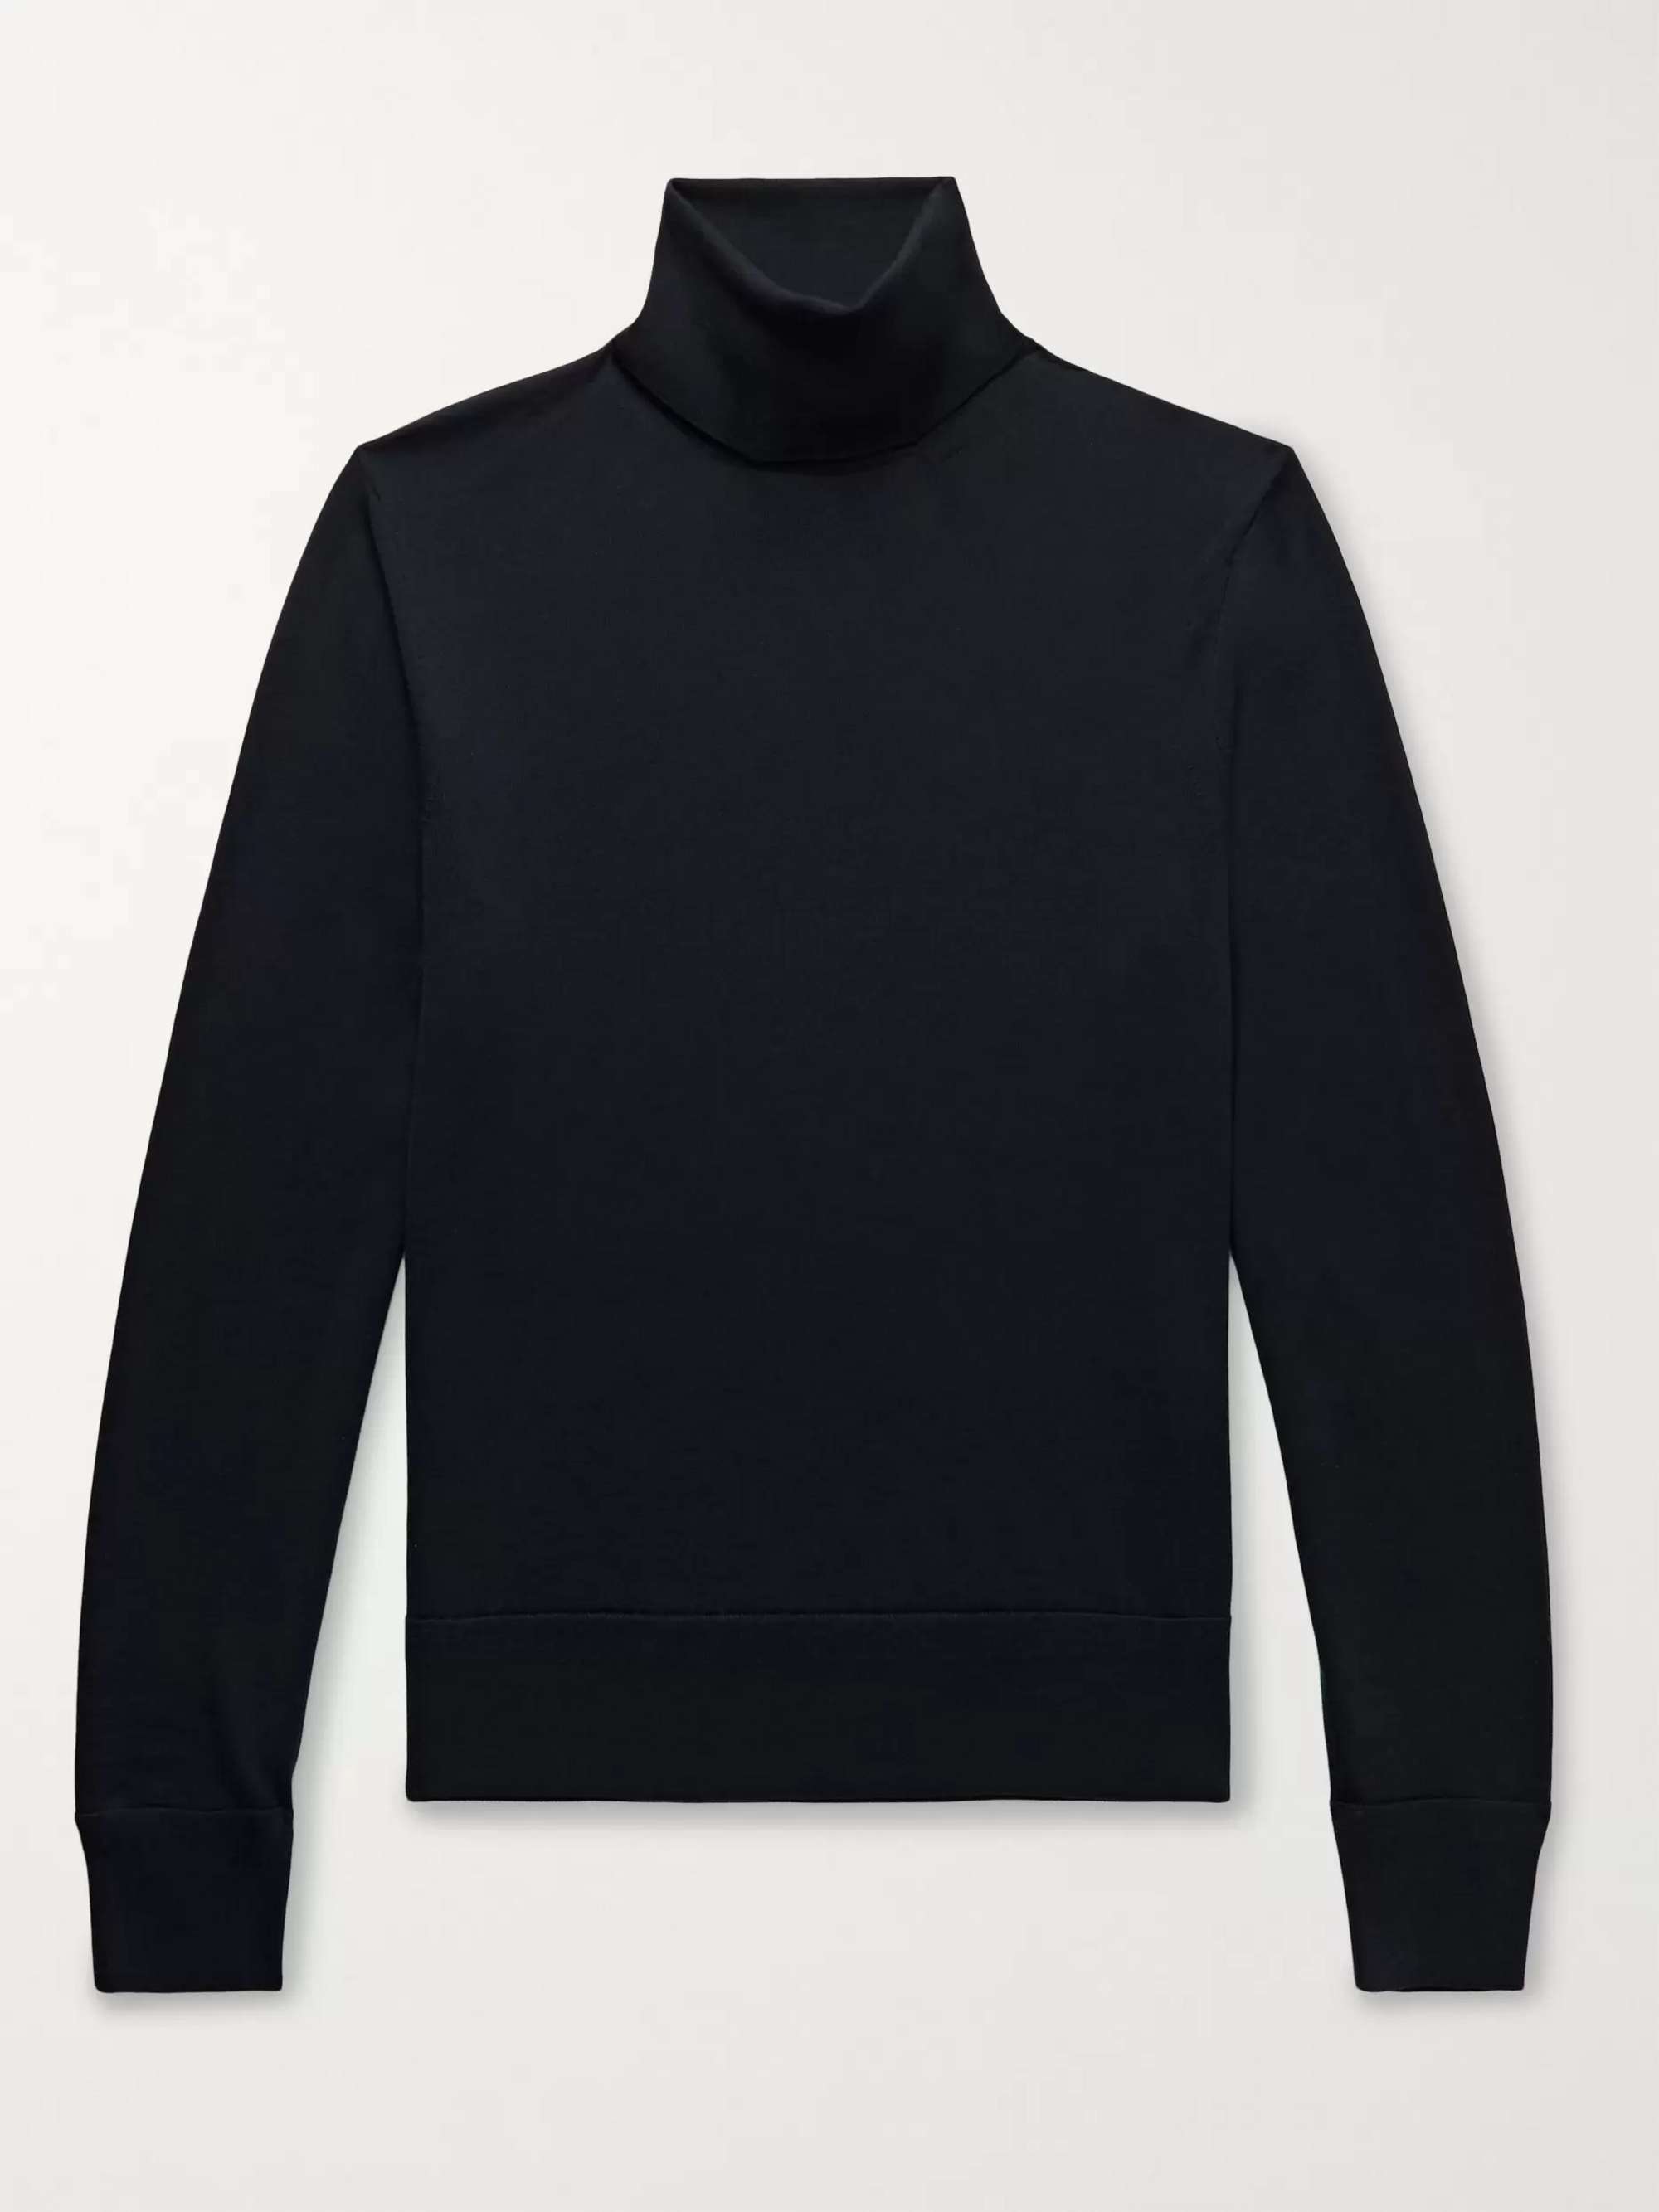 TOM FORD Wool Rollneck Sweater